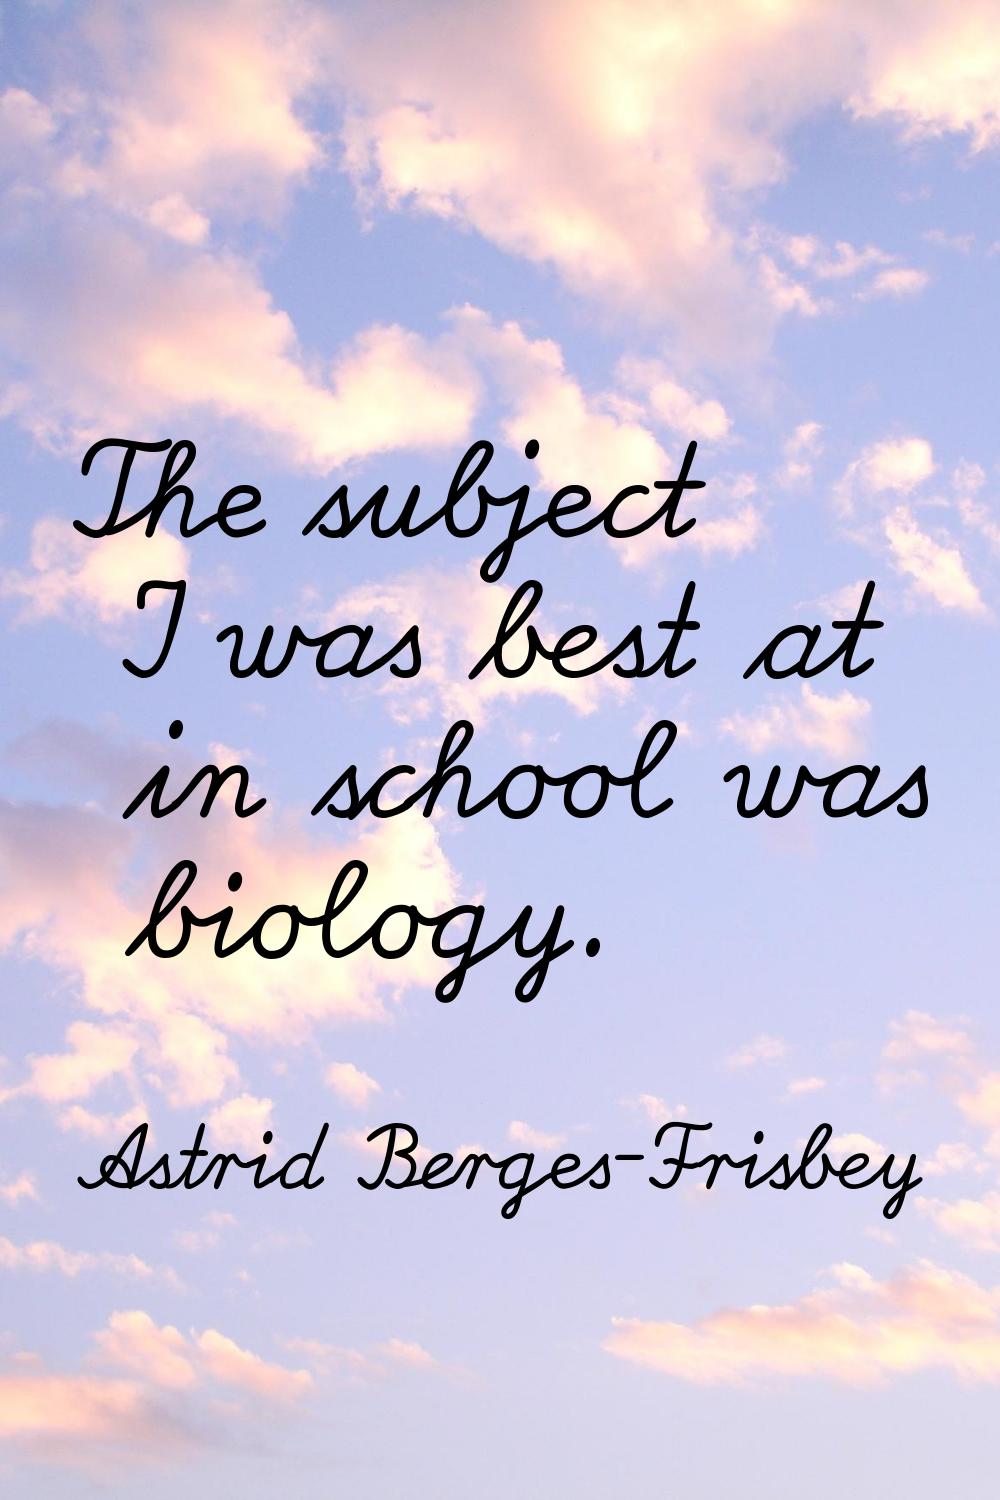 The subject I was best at in school was biology.